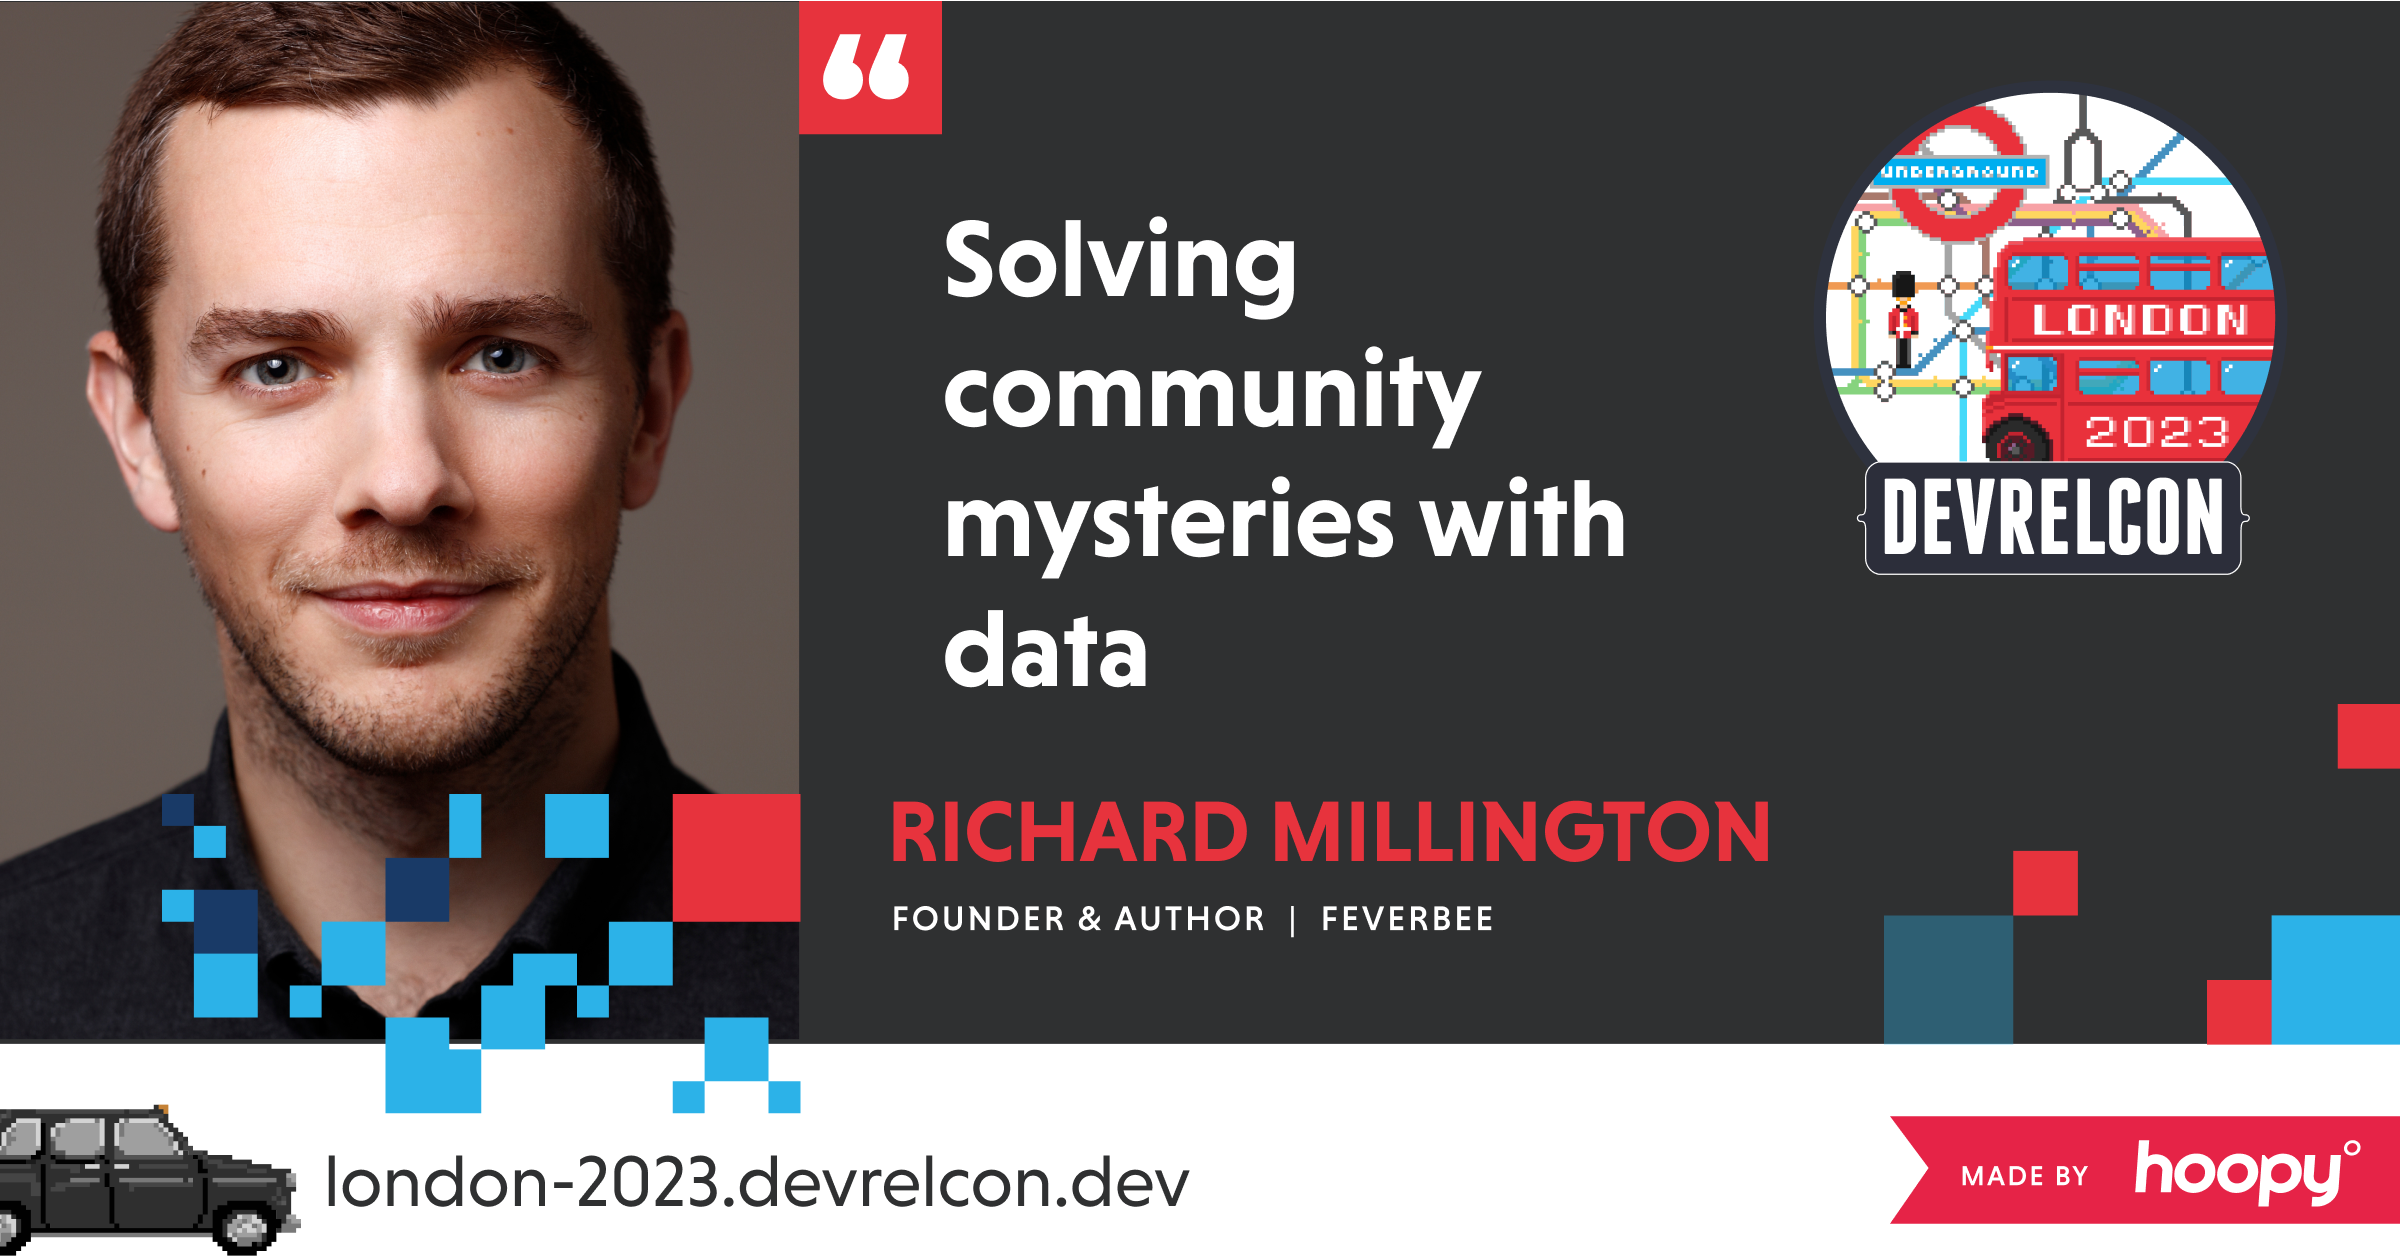 Richard Millington shares what his talk will be about at DevRelCon London 2023